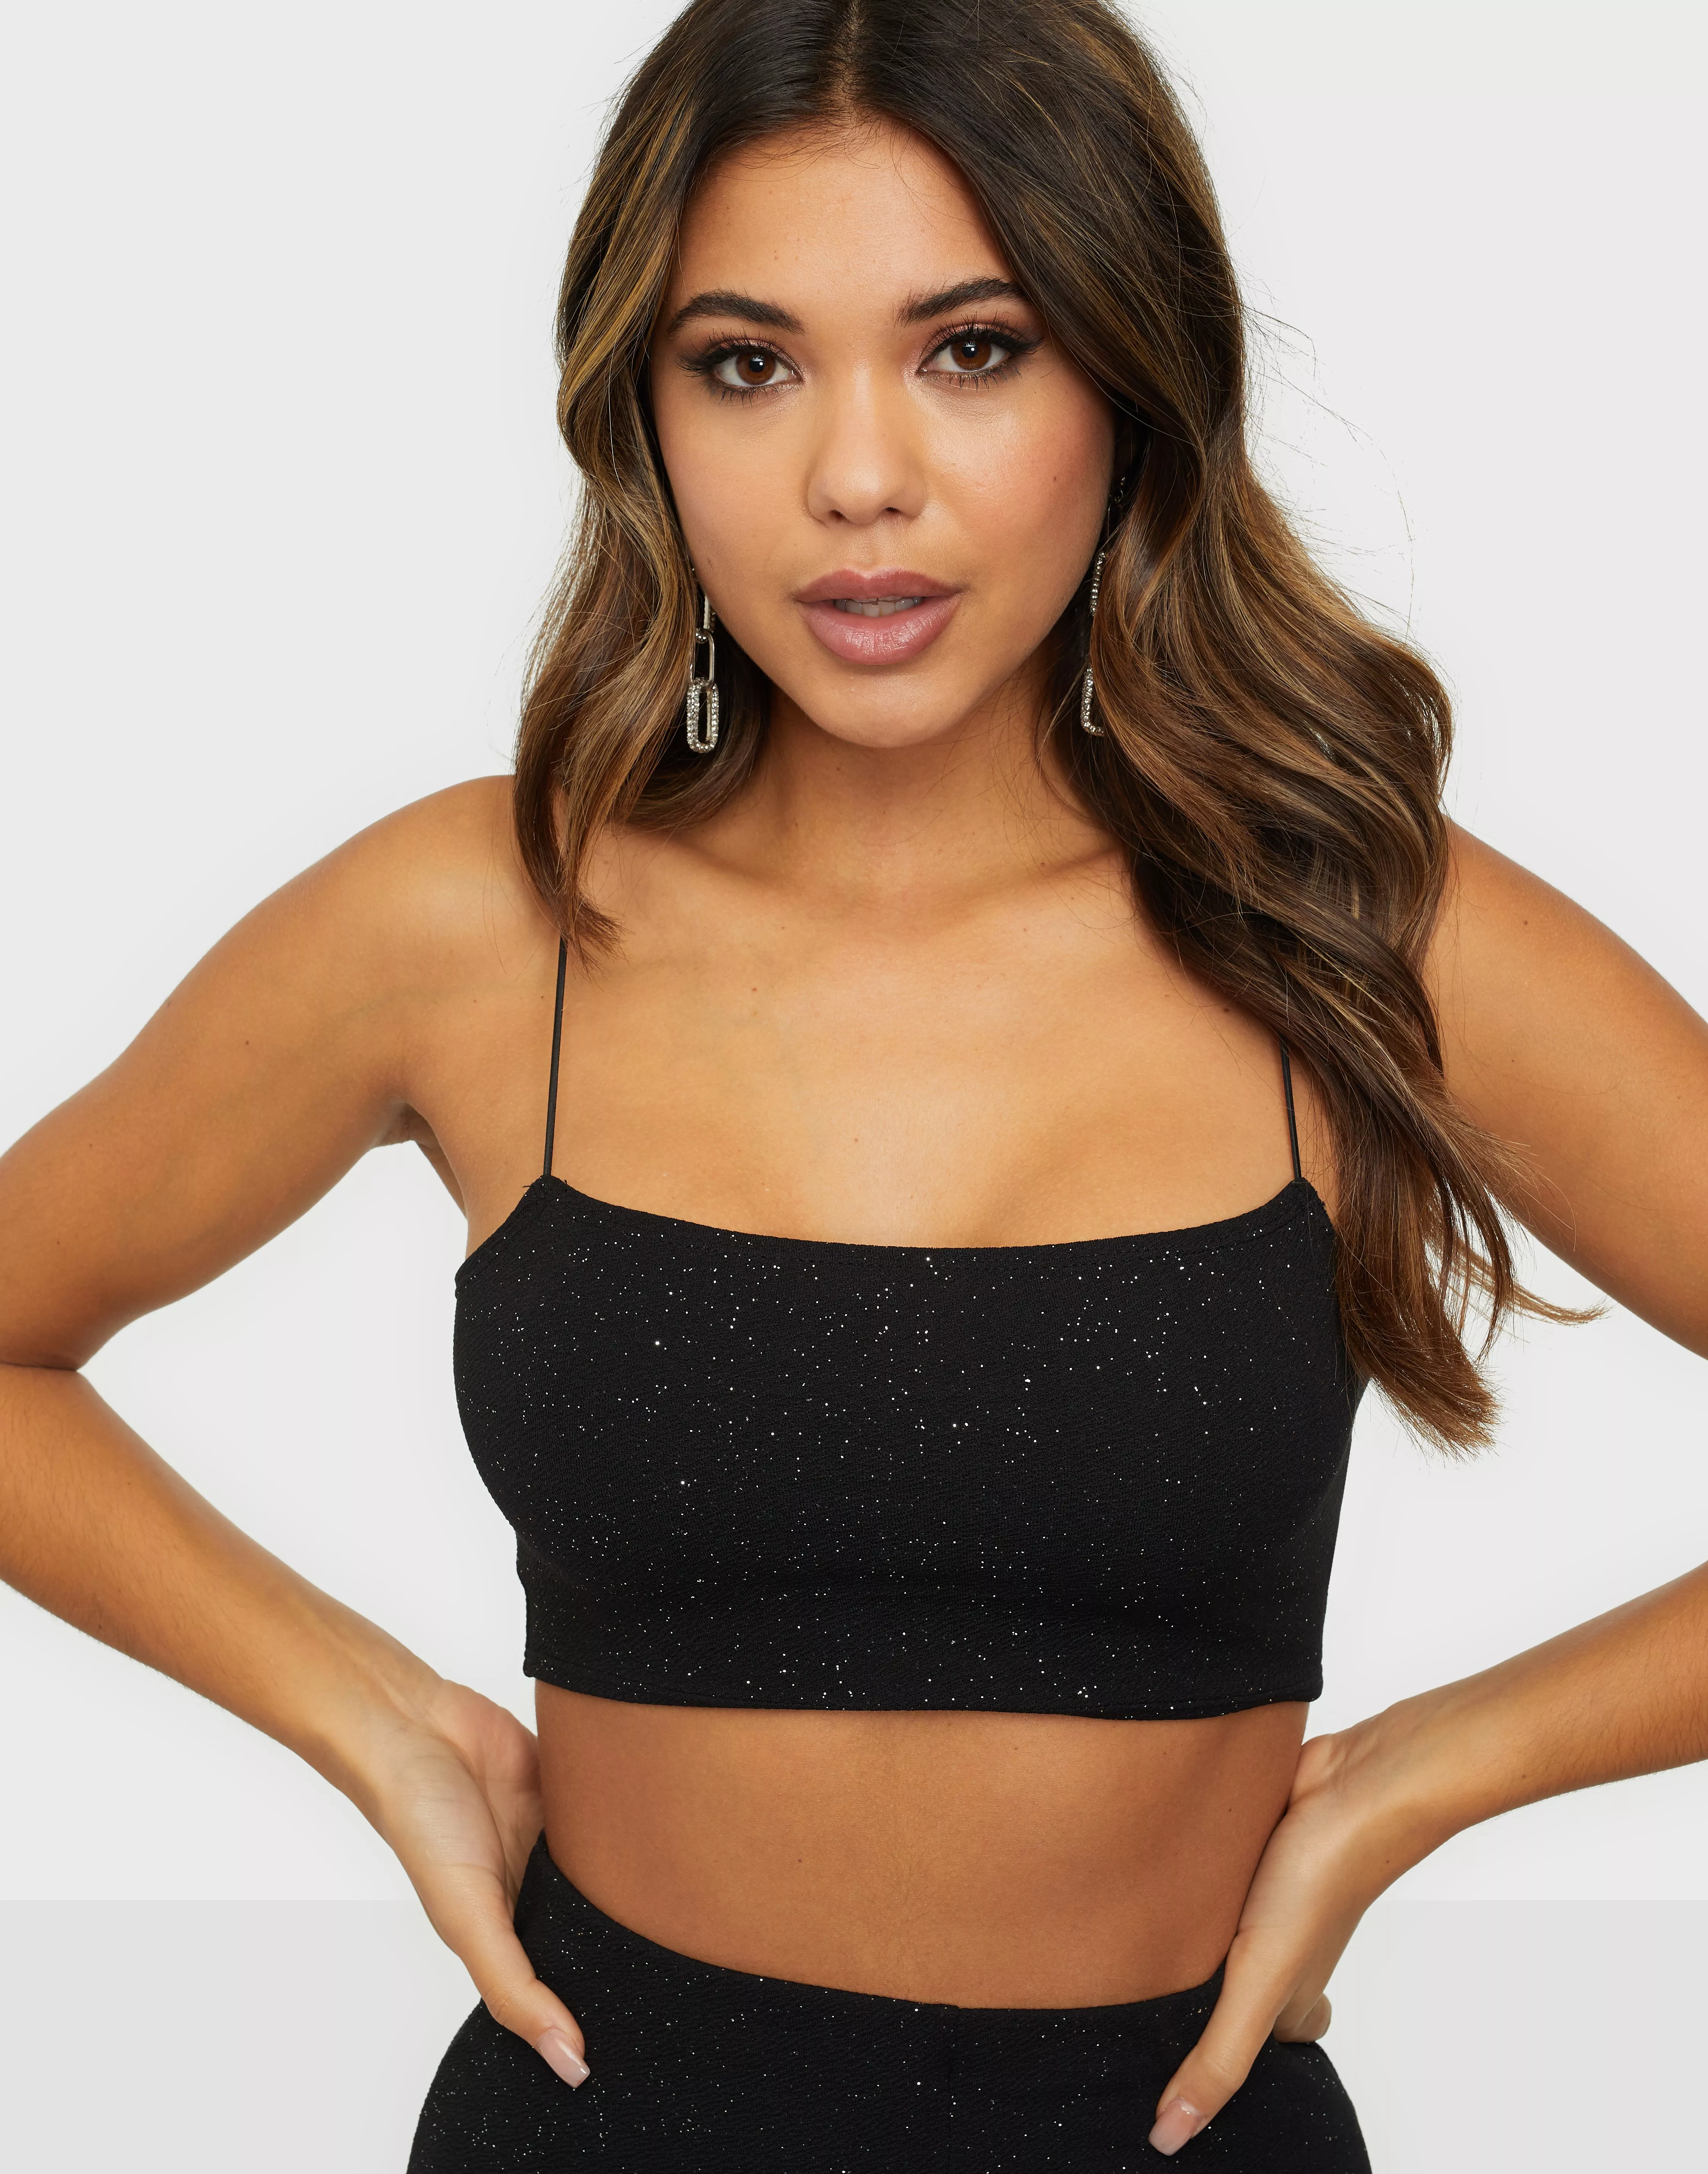 Buy Nelly Crop Top - Black | Nelly.com